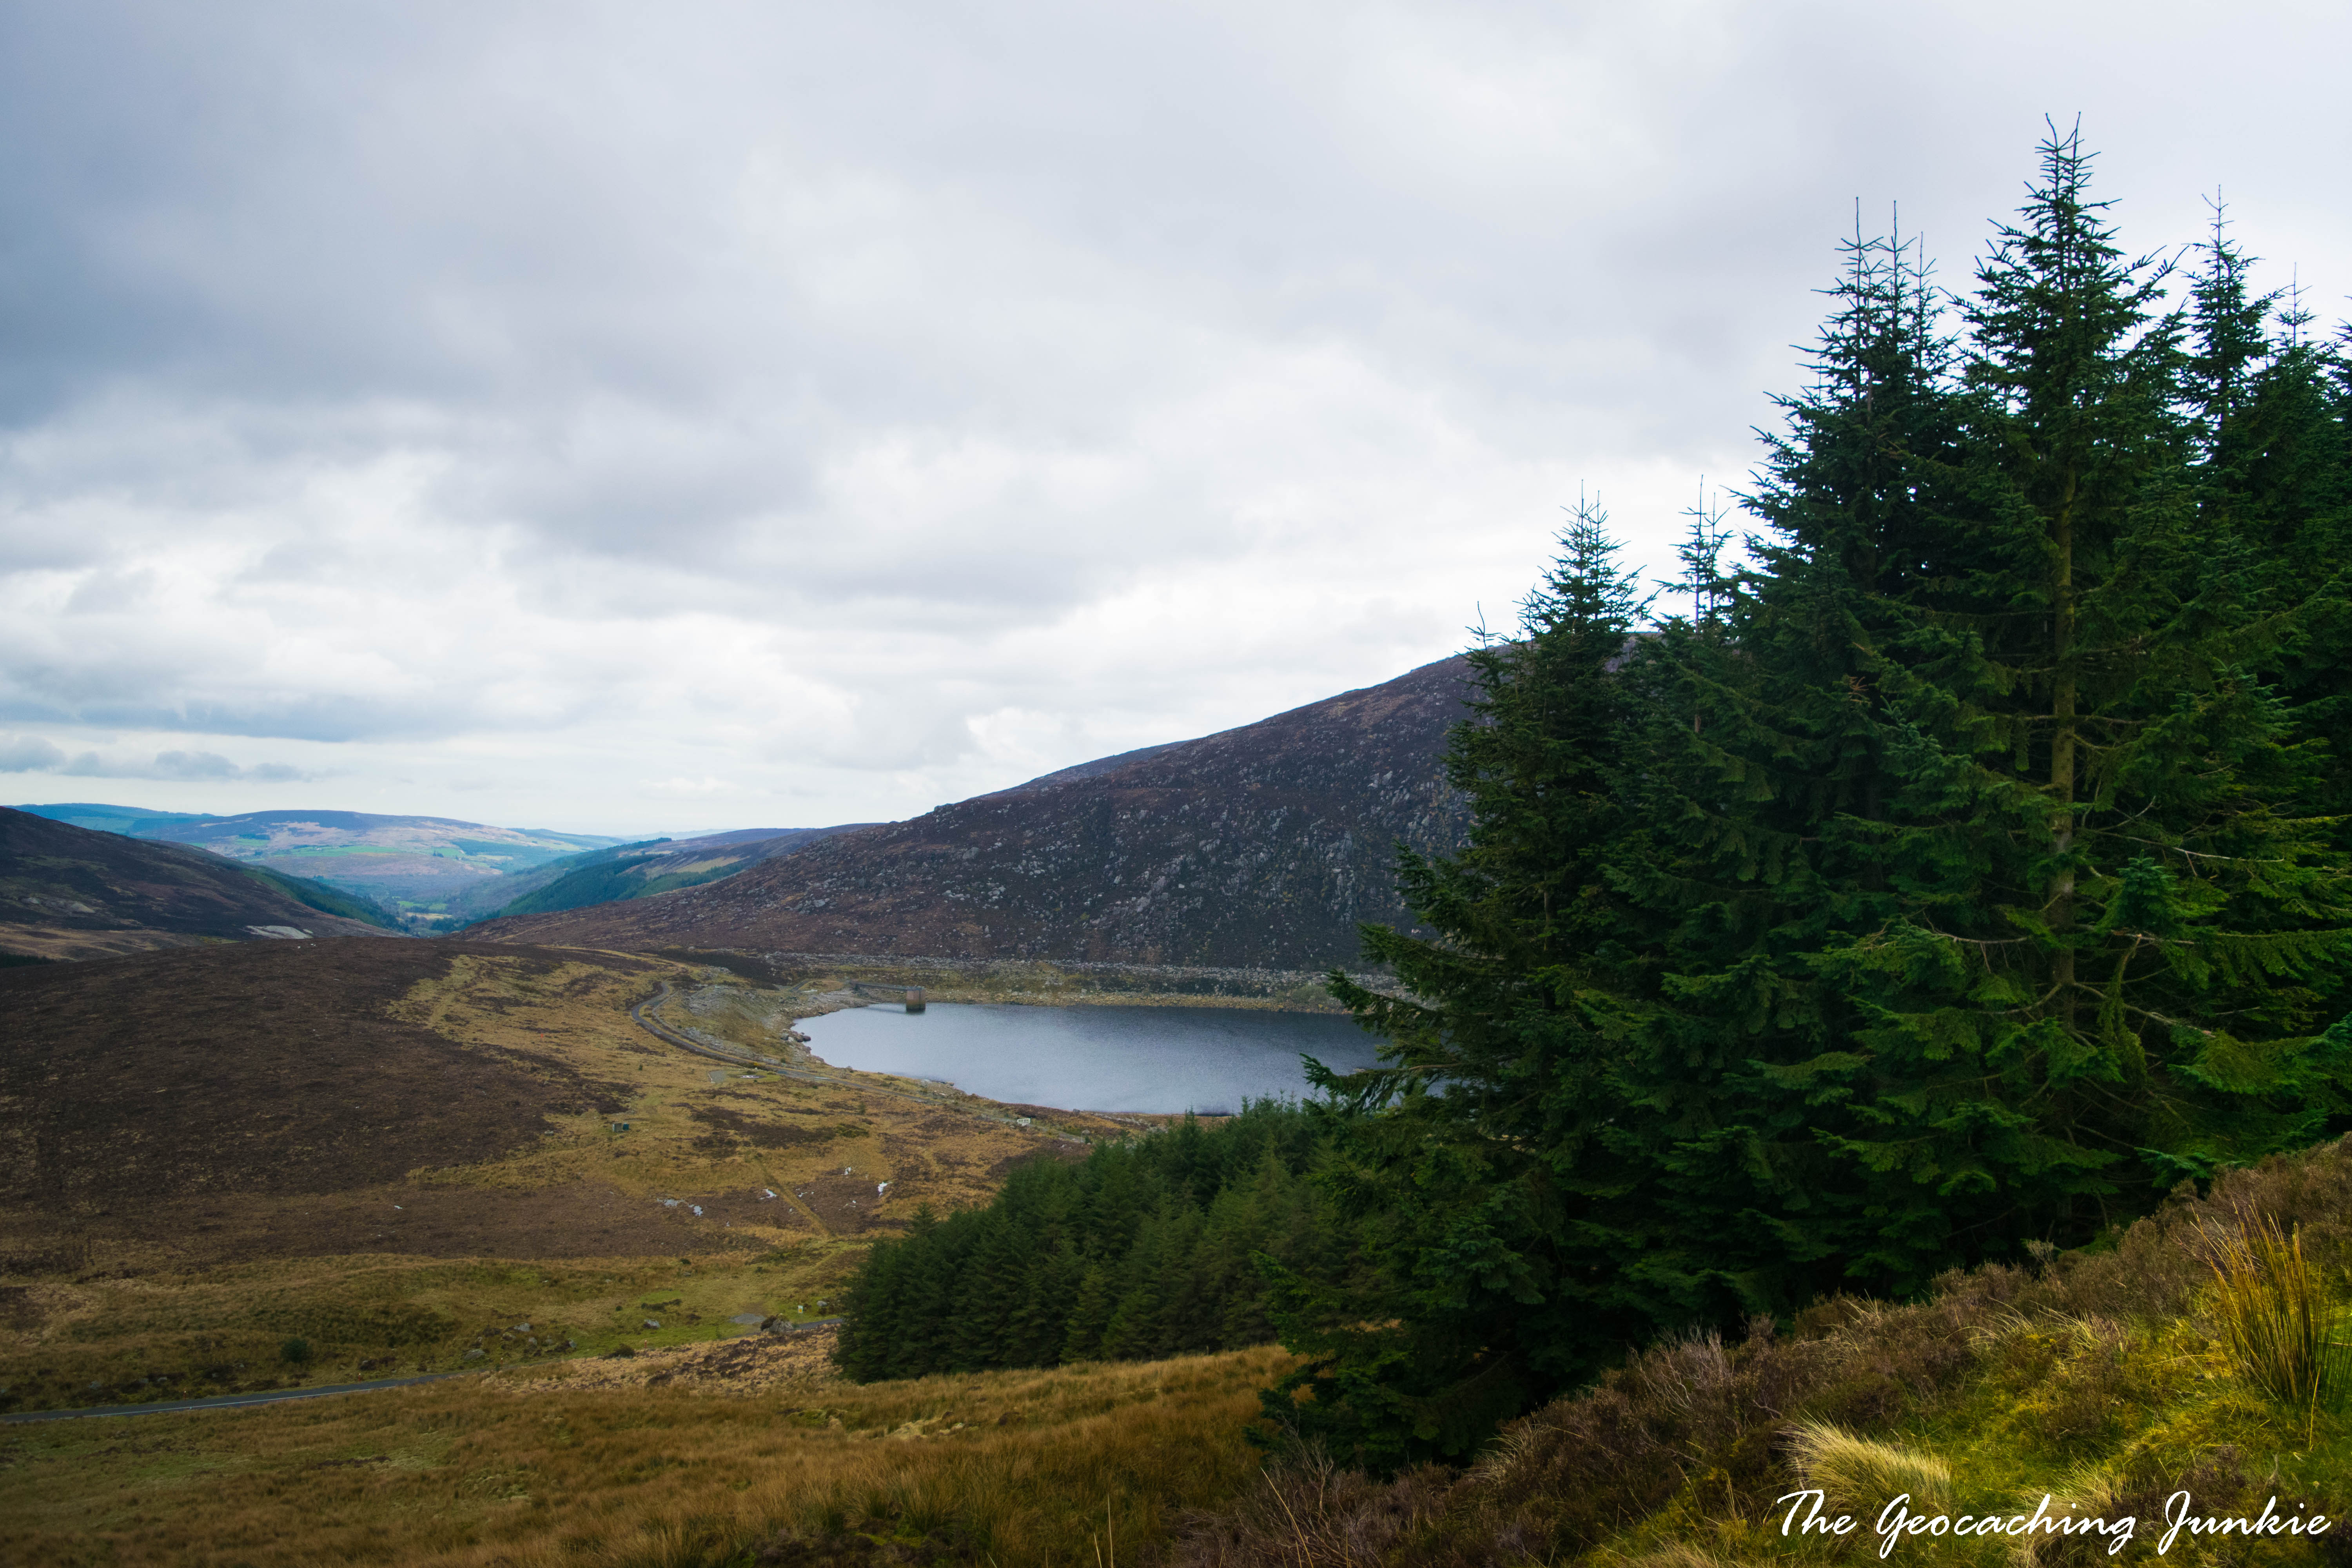 The Geocaching Junkie: April Hike - Turlough Hill, County Wicklow